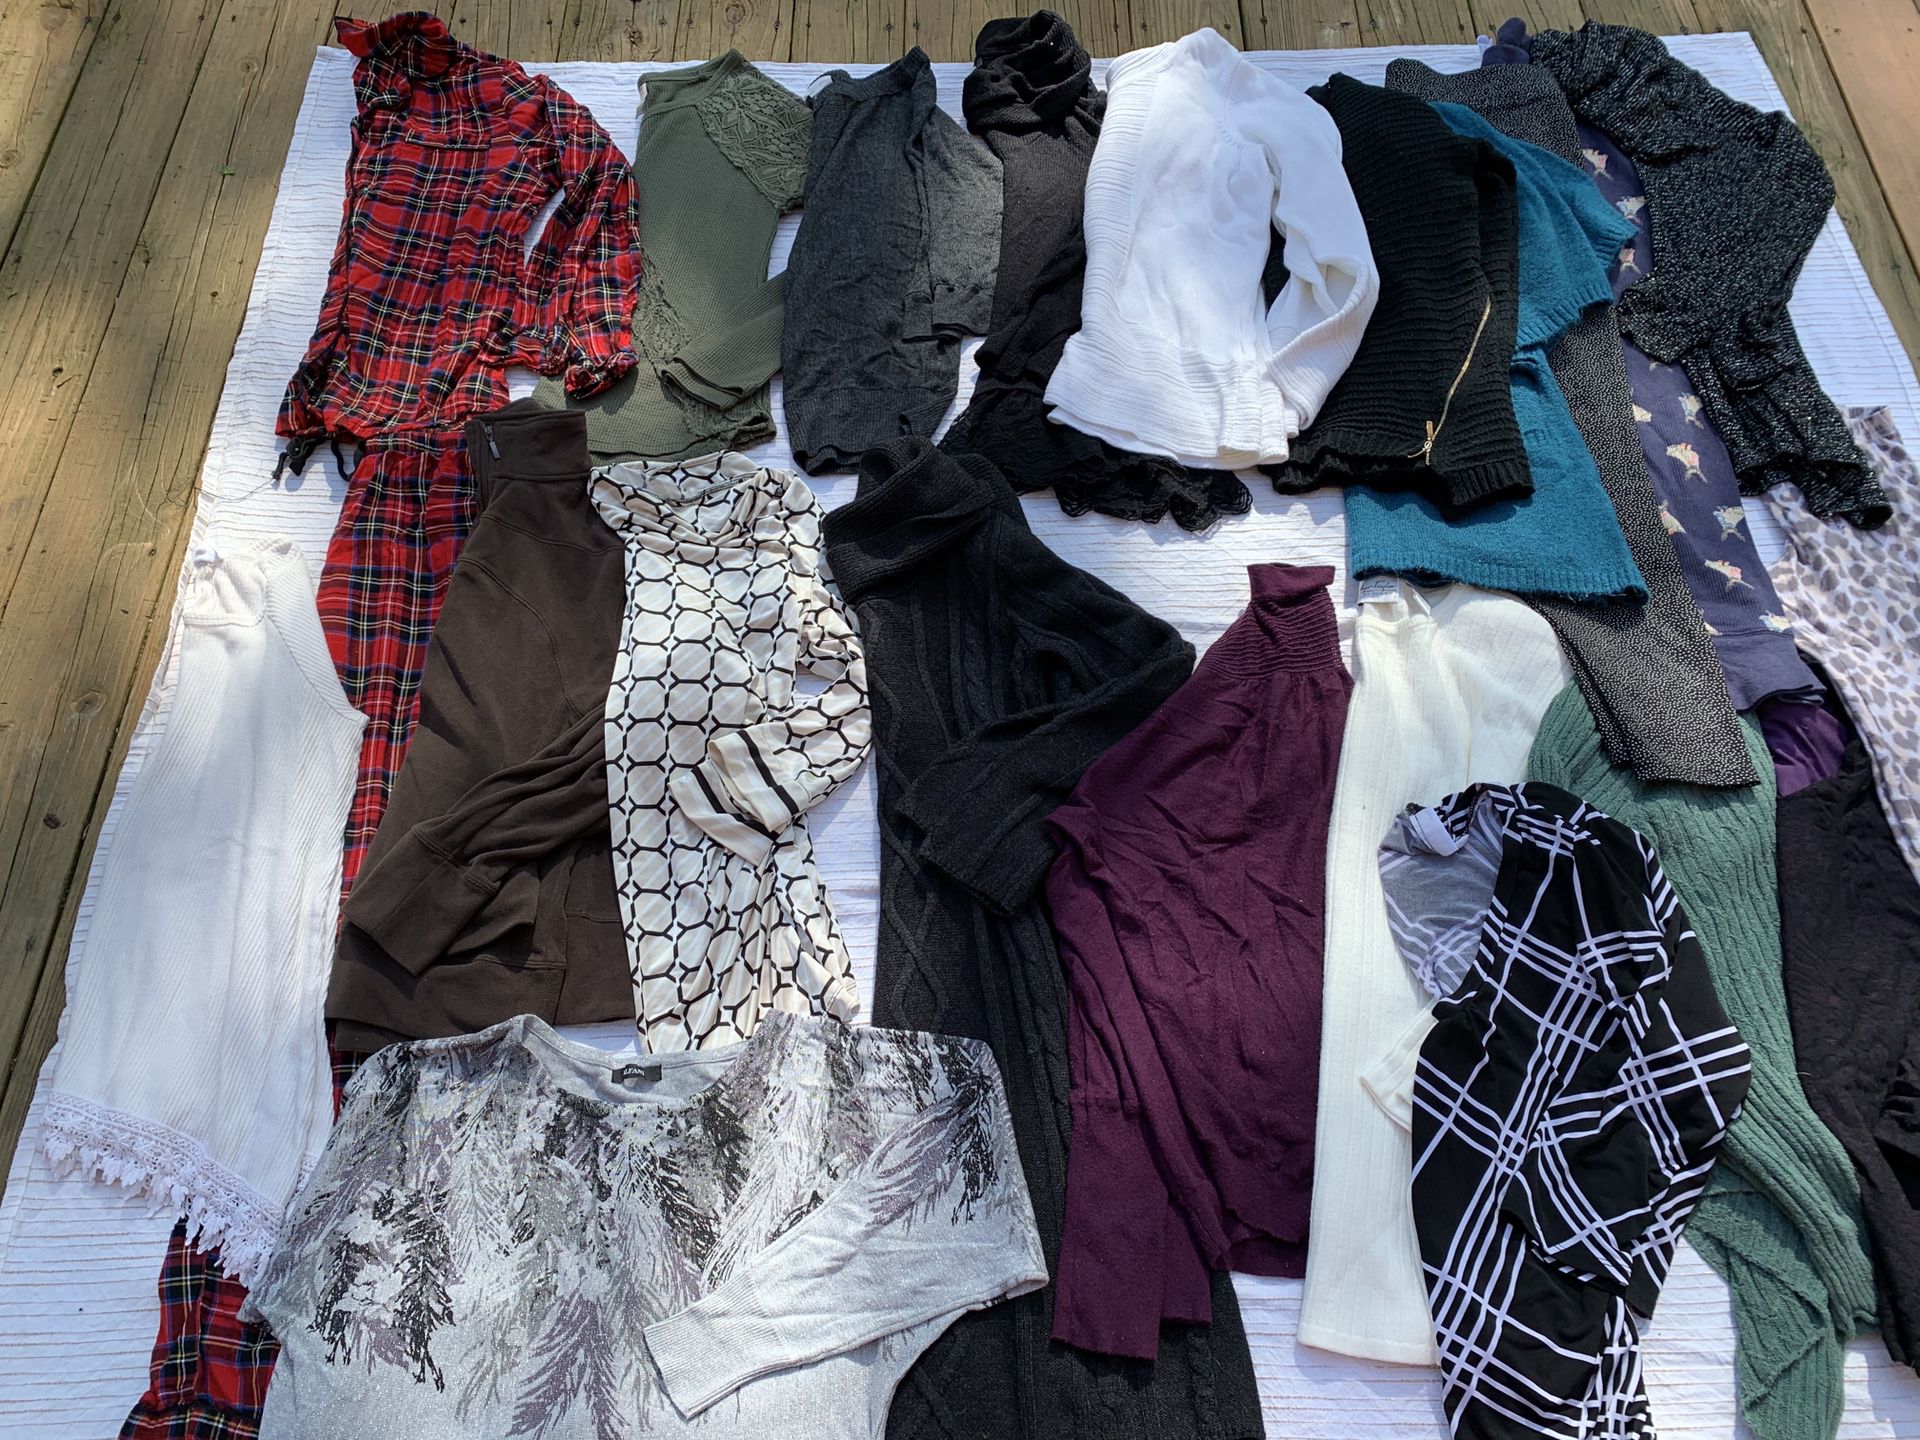 Women’s size medium fall winter lot! Clean no holes rips or stains